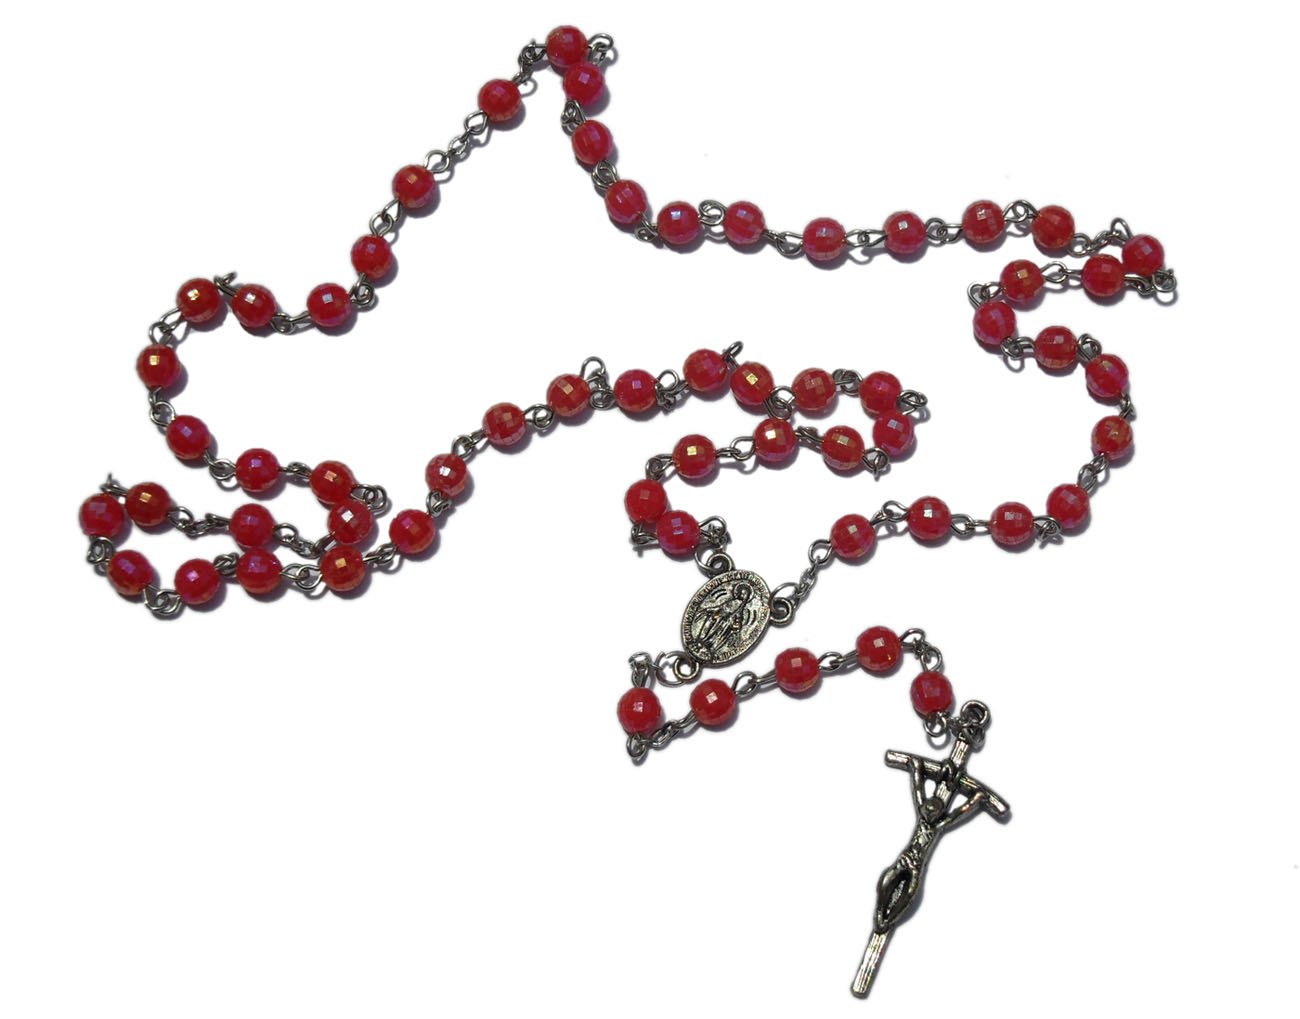 Clip Arts Related To : transparent background rosary png. view all Rosary B...